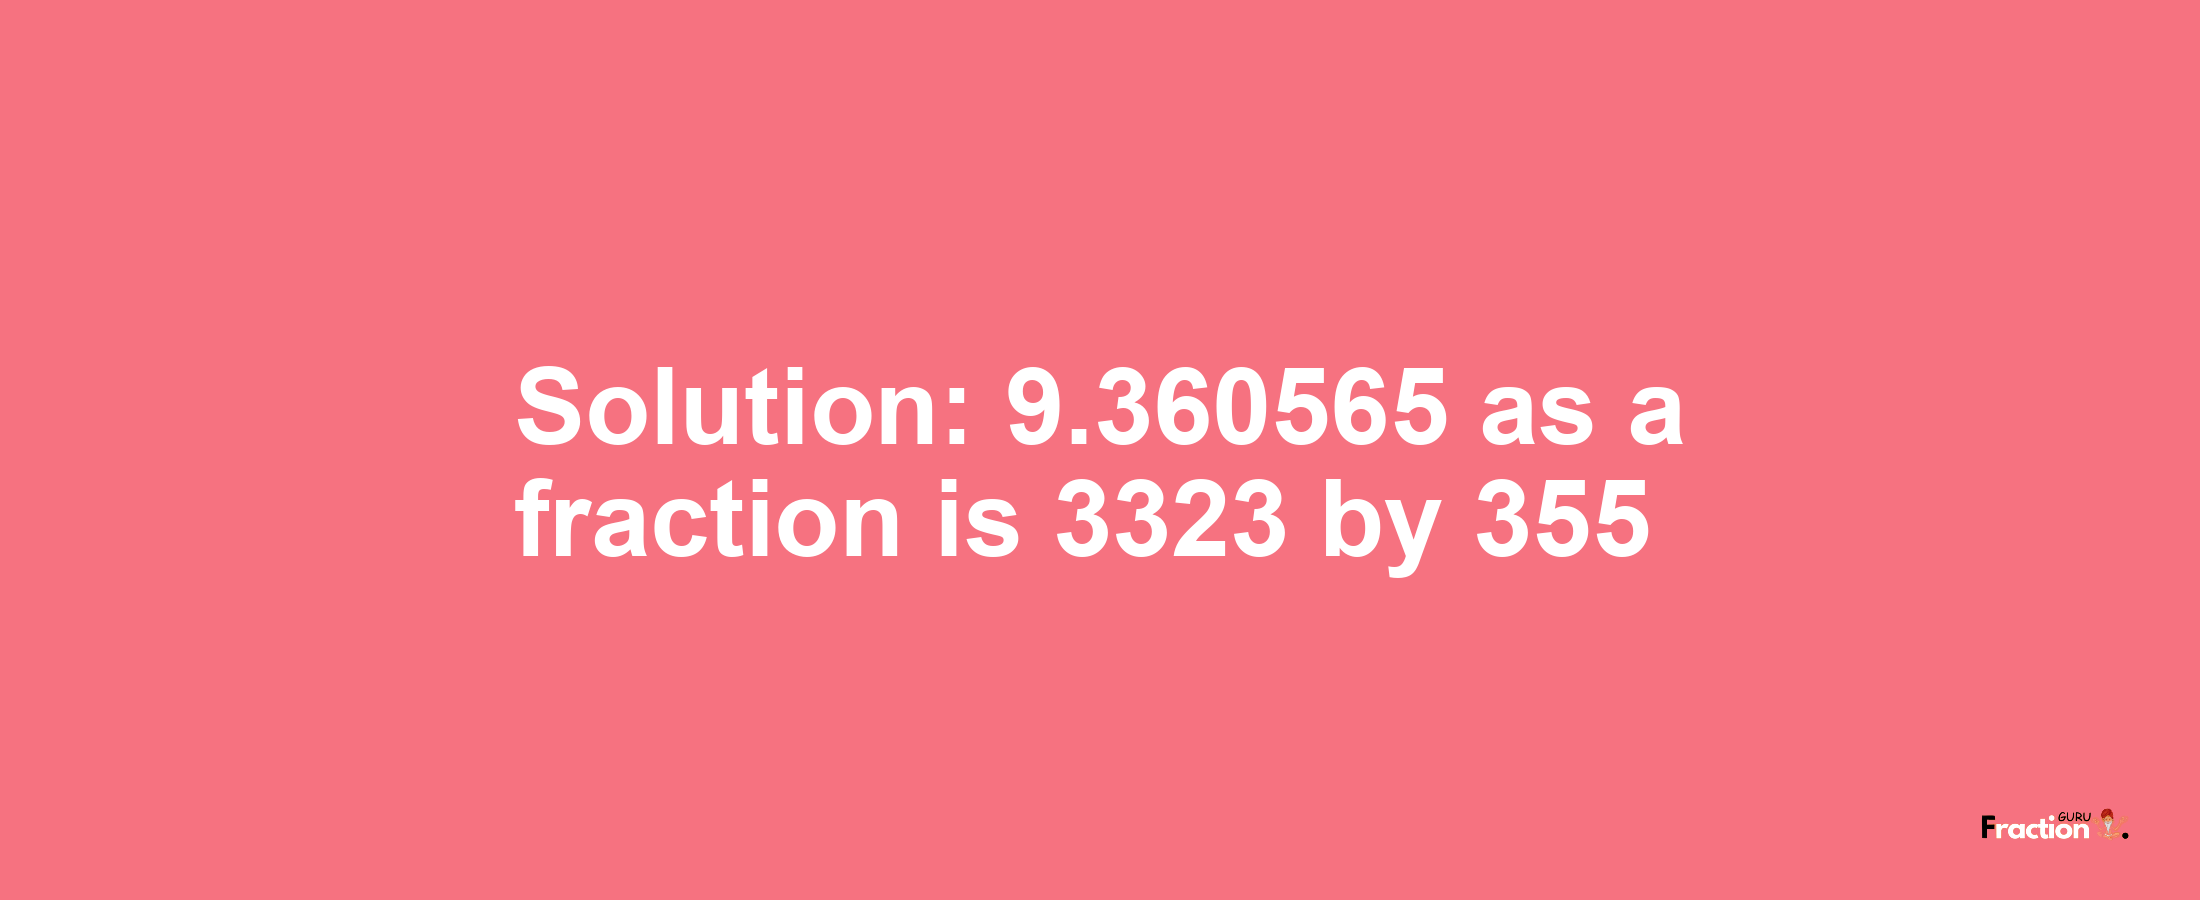 Solution:9.360565 as a fraction is 3323/355